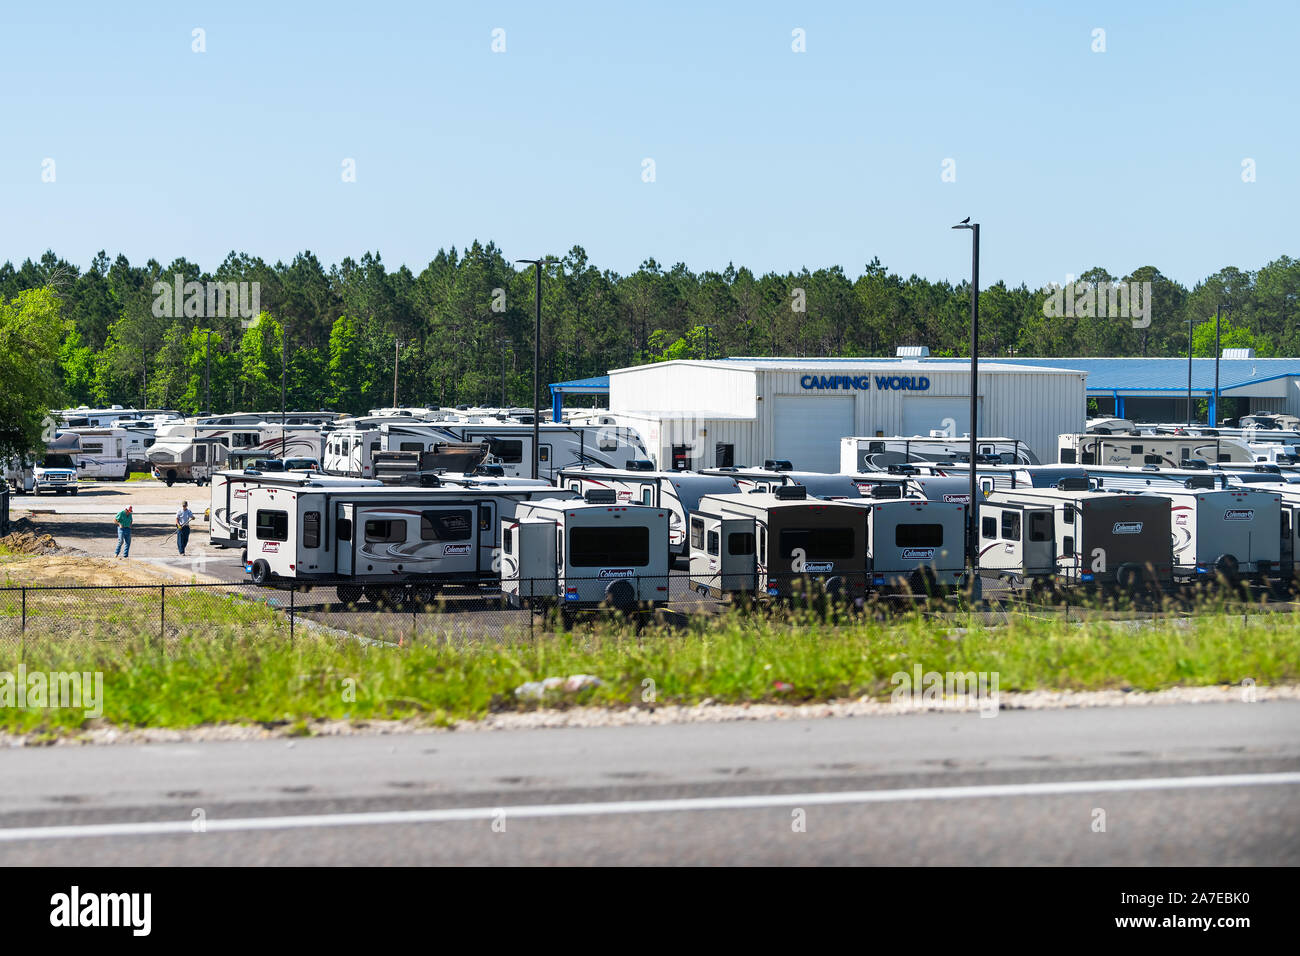 Biloxi, USA - April 24, 2018: Industrial factory in Mississippi with warehouse business called Camping World for RV trailers Coleman trucks Stock Photo